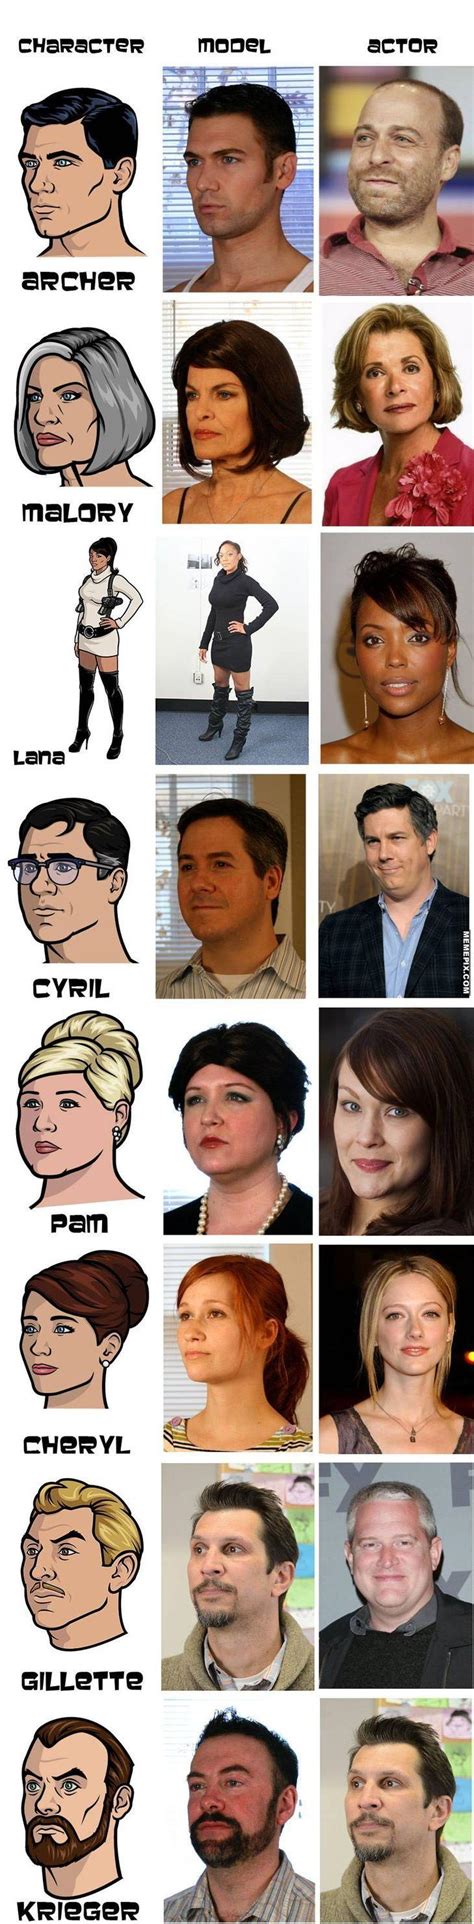 The Characters Models And Voice Actors Of Archer — Geektyrant